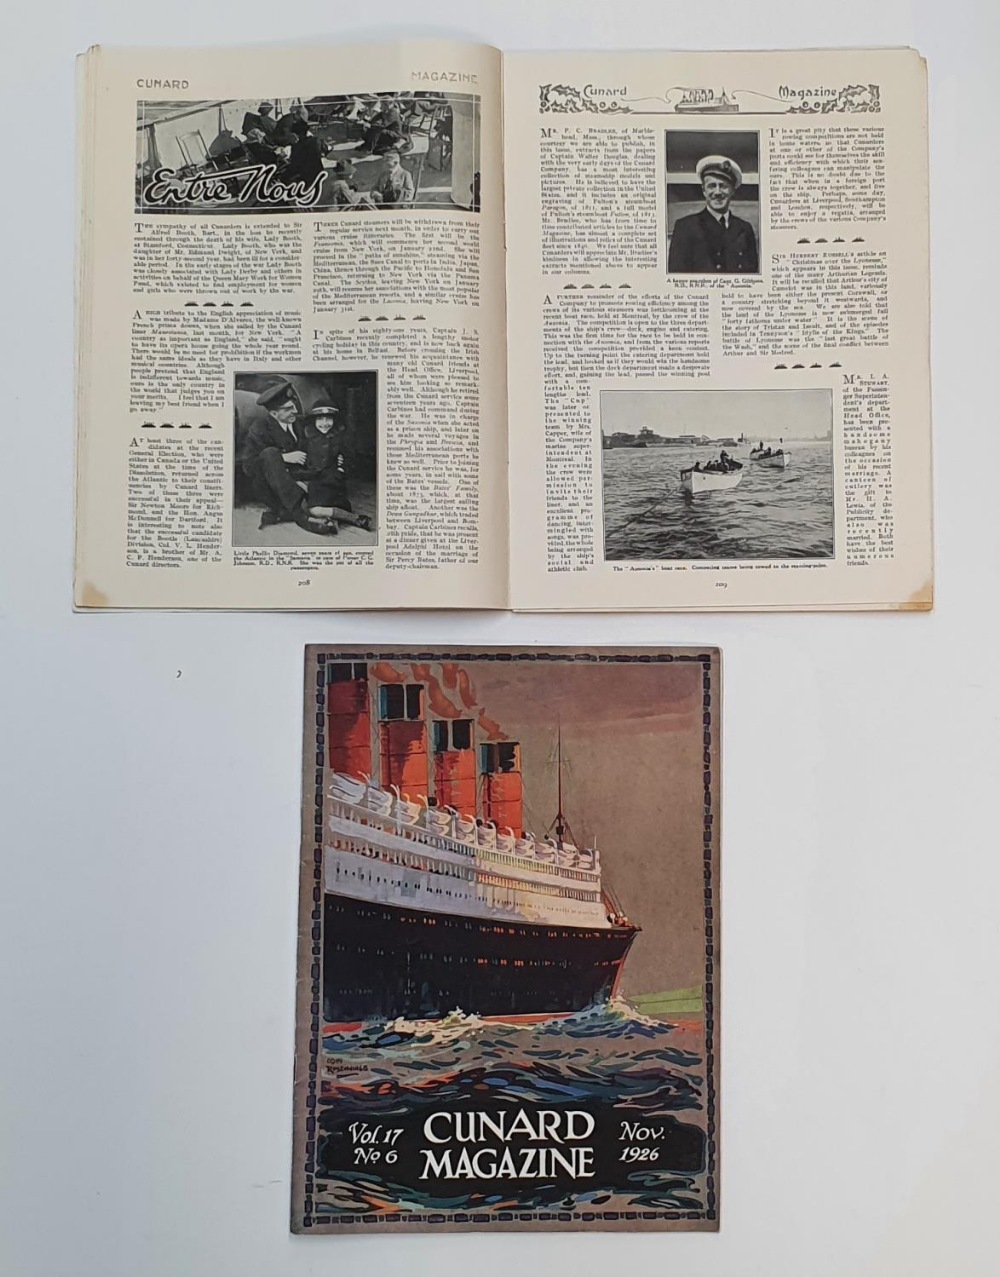 2 Cunard Magazines, Dec 1924 & Nov 1926 editions Both are in very good condition - Image 2 of 4